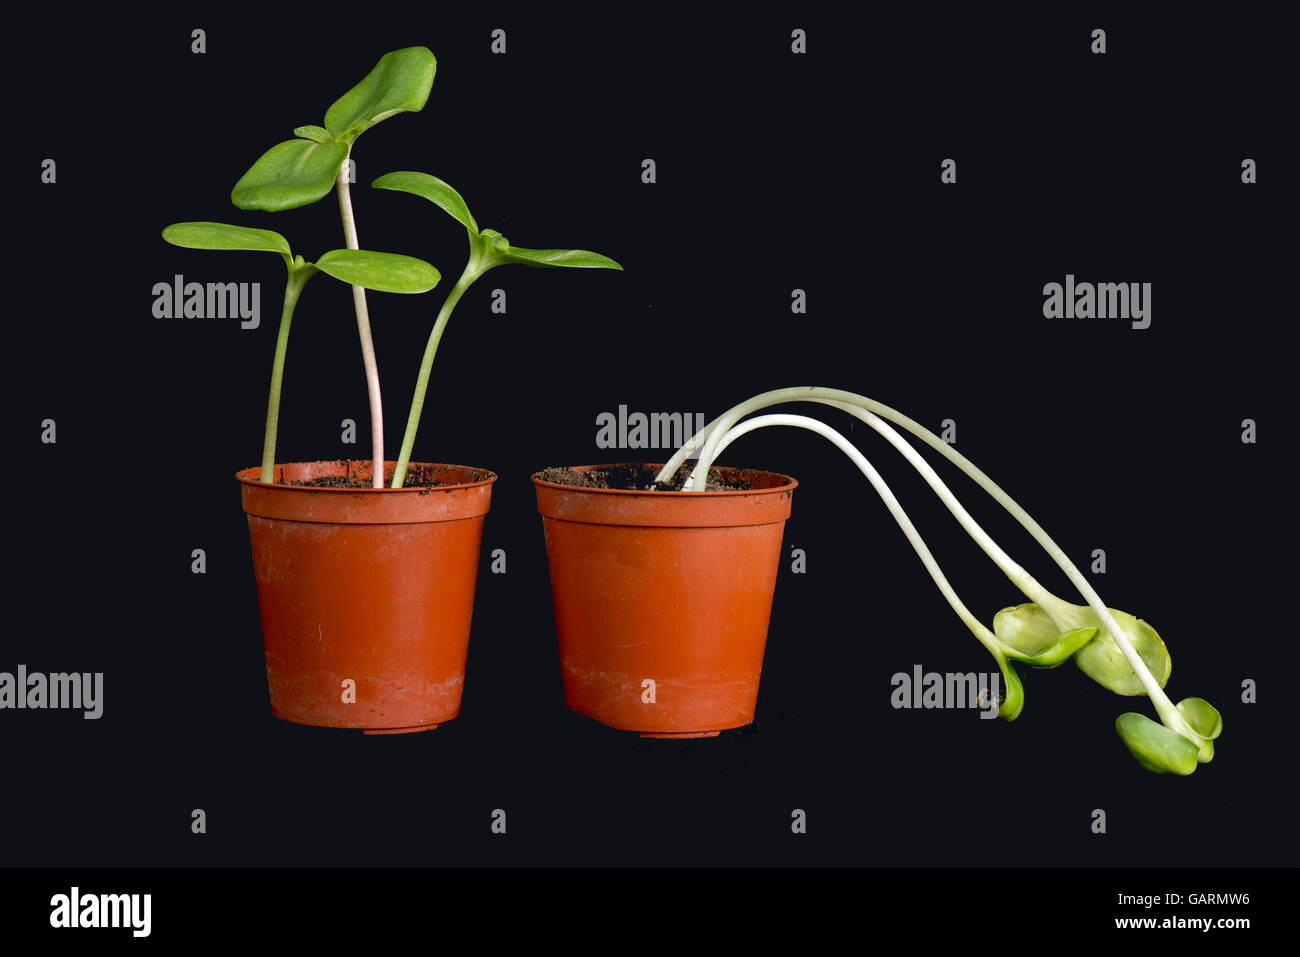 Sunflower seedlings grown with and etiolated, chlorotic and week without light (right) Stock Photo